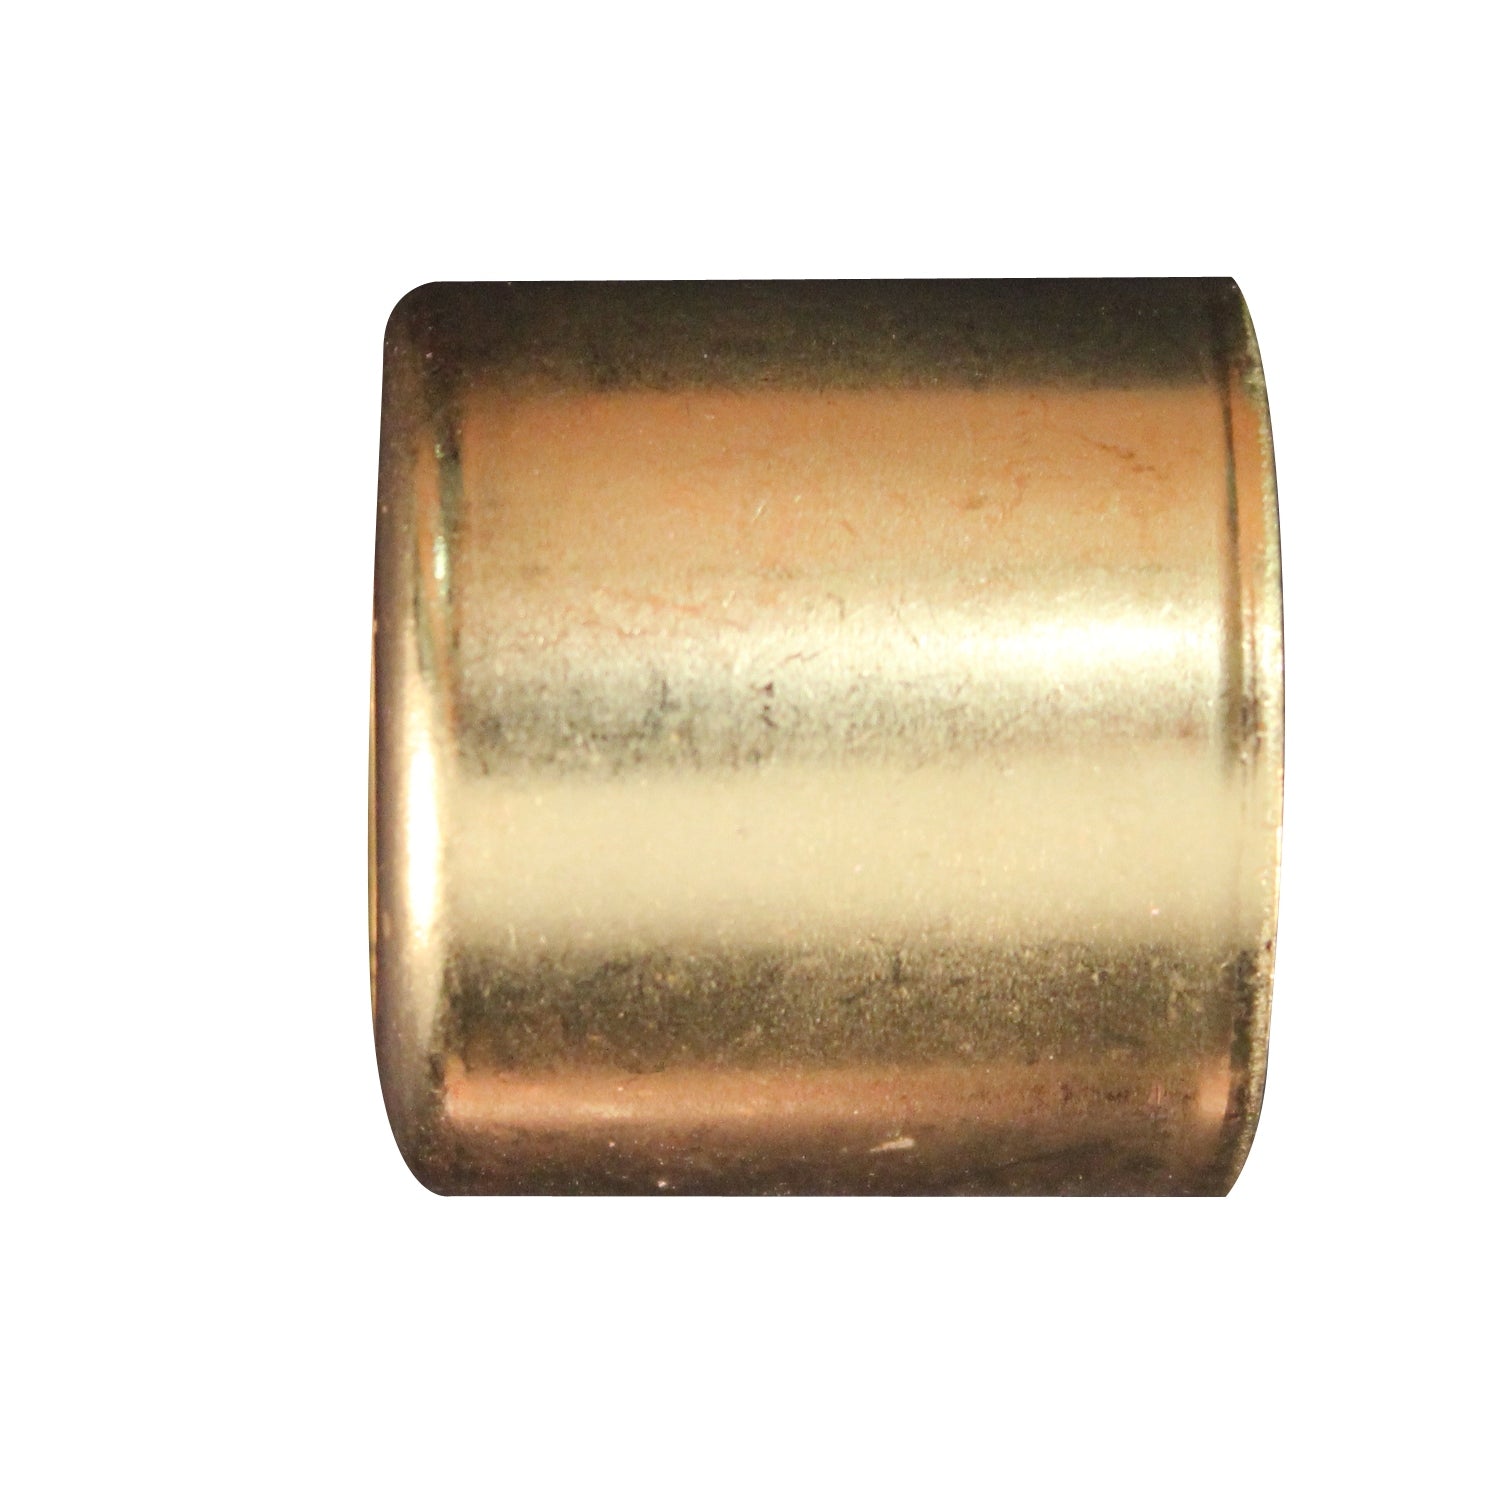 Brass Ferrules - Lee Valley Tools